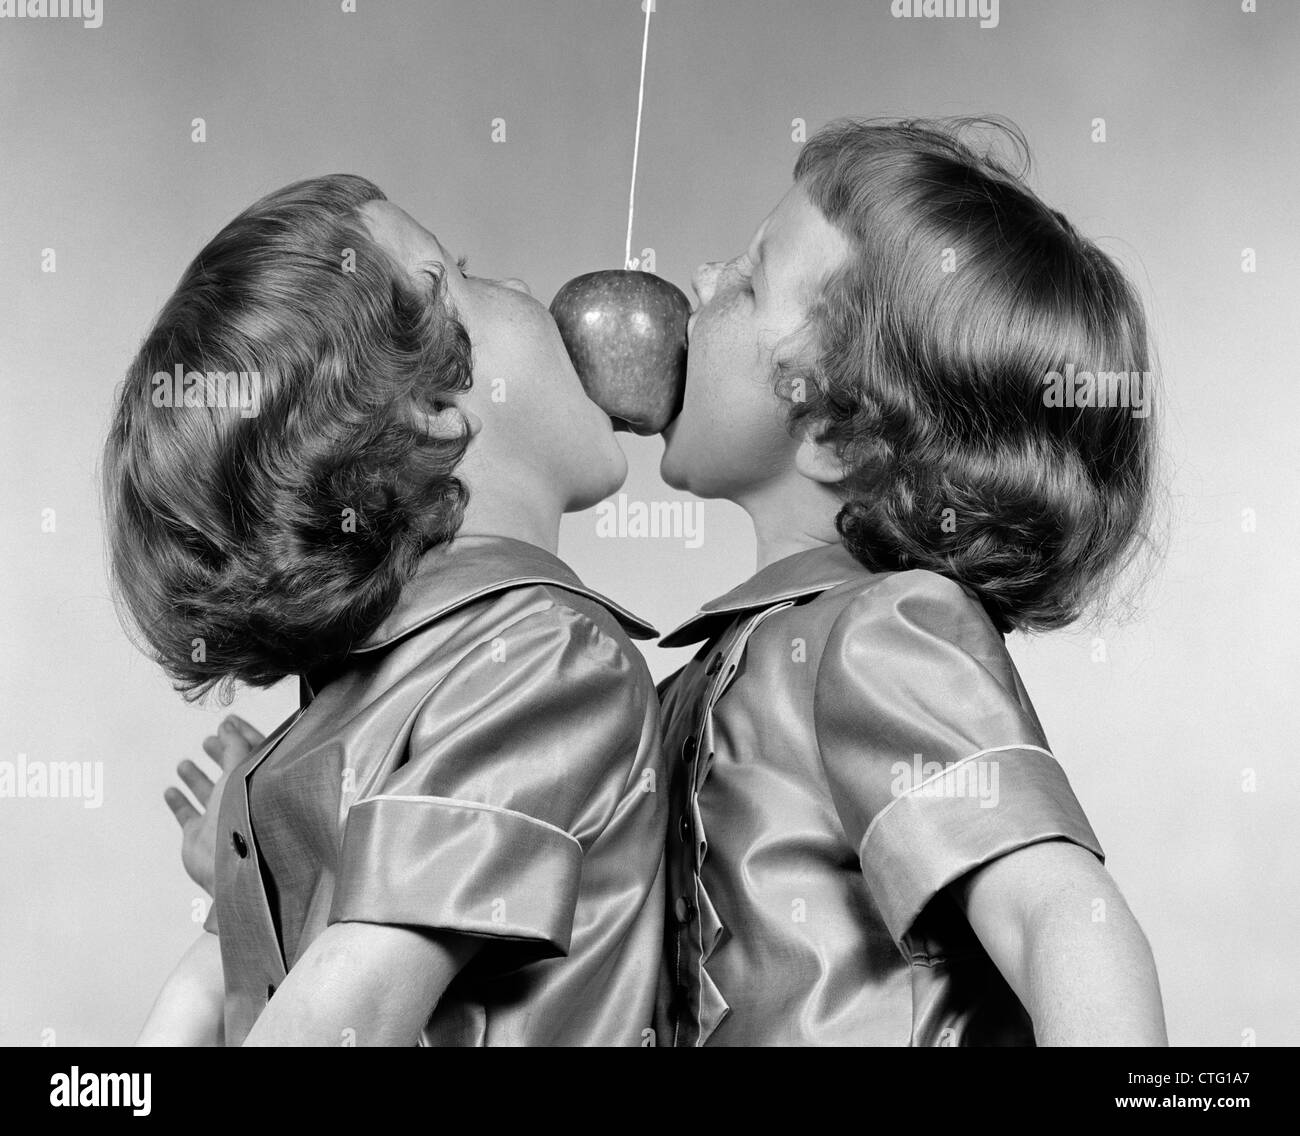 1950s IDENTICAL TWIN GIRLS TRYING TO EAT AN APPLE HANGING IN THE AIR FROM A STRING Stock Photo